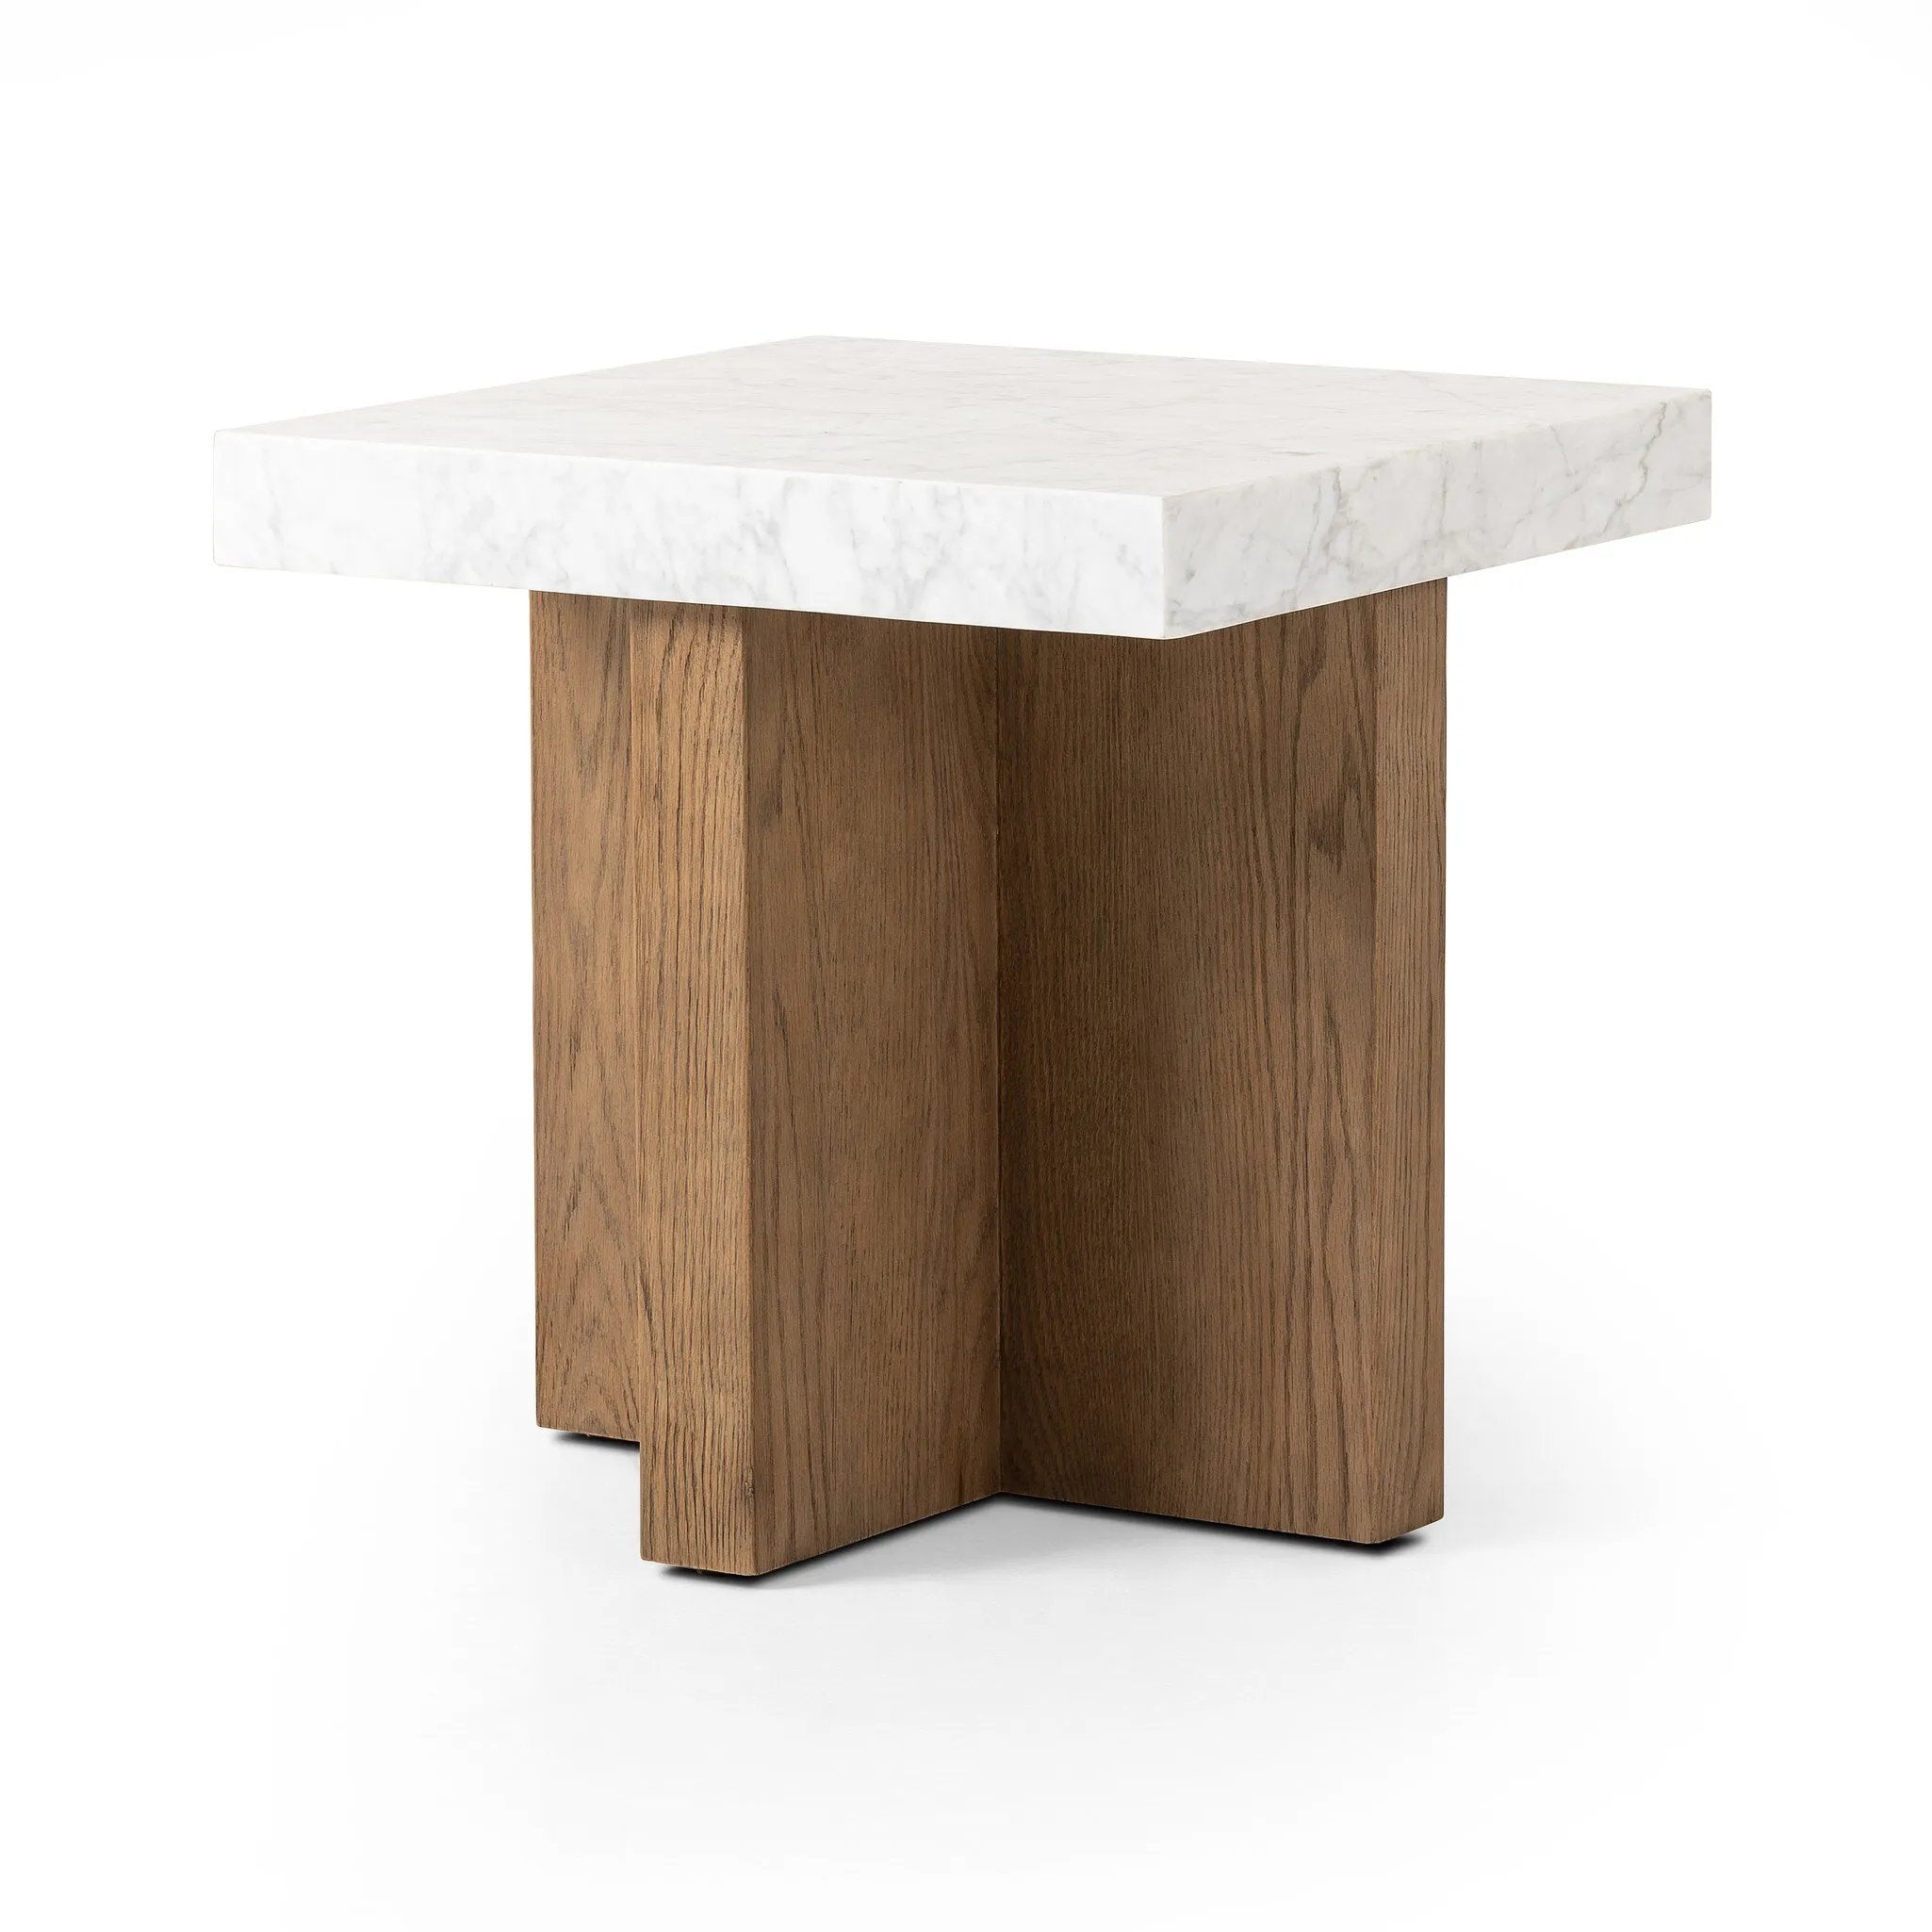 Structured lines and chunky proportions fuse for a mixed material end table of smoked oak and polished marble.Collection: Hughe Amethyst Home provides interior design, new home construction design consulting, vintage area rugs, and lighting in the Houston metro area.